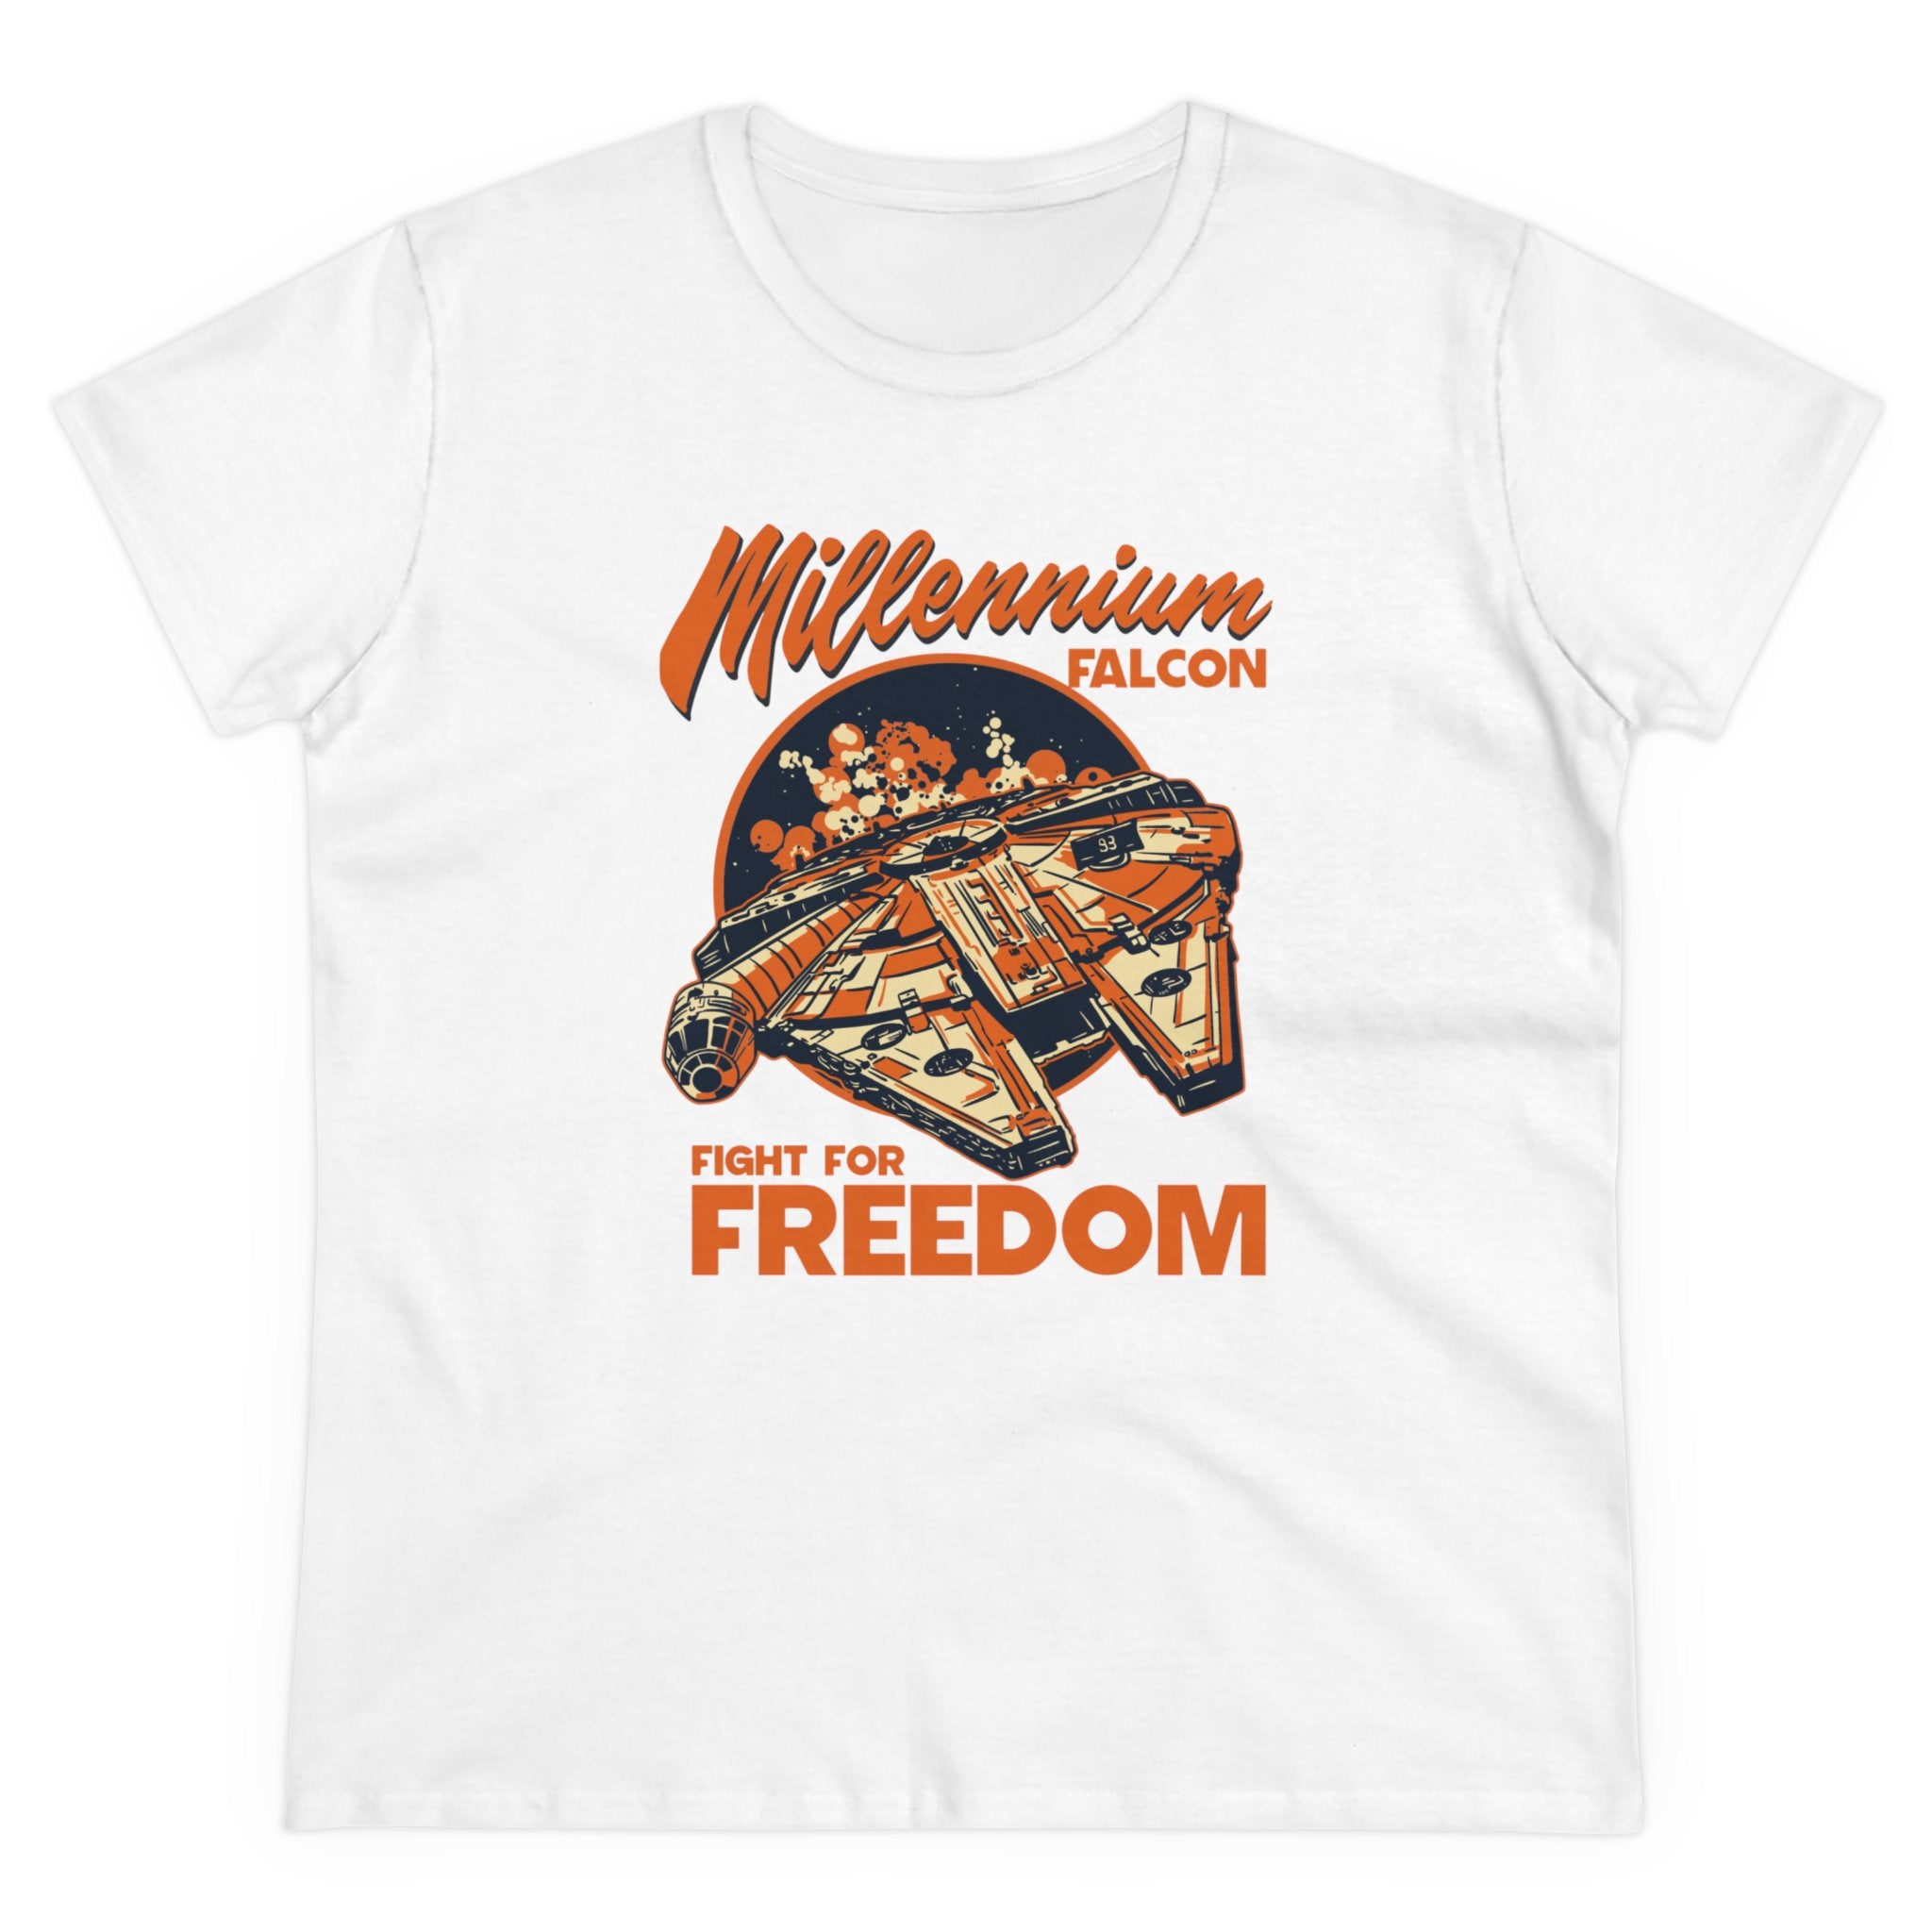 Falcon - Women's Tee made from soft pre-shrunk cotton, featuring an illustration of a spaceship with the text "Millennium Falcon" and "Fight for Freedom" in orange and black lettering, offering both comfort and style.